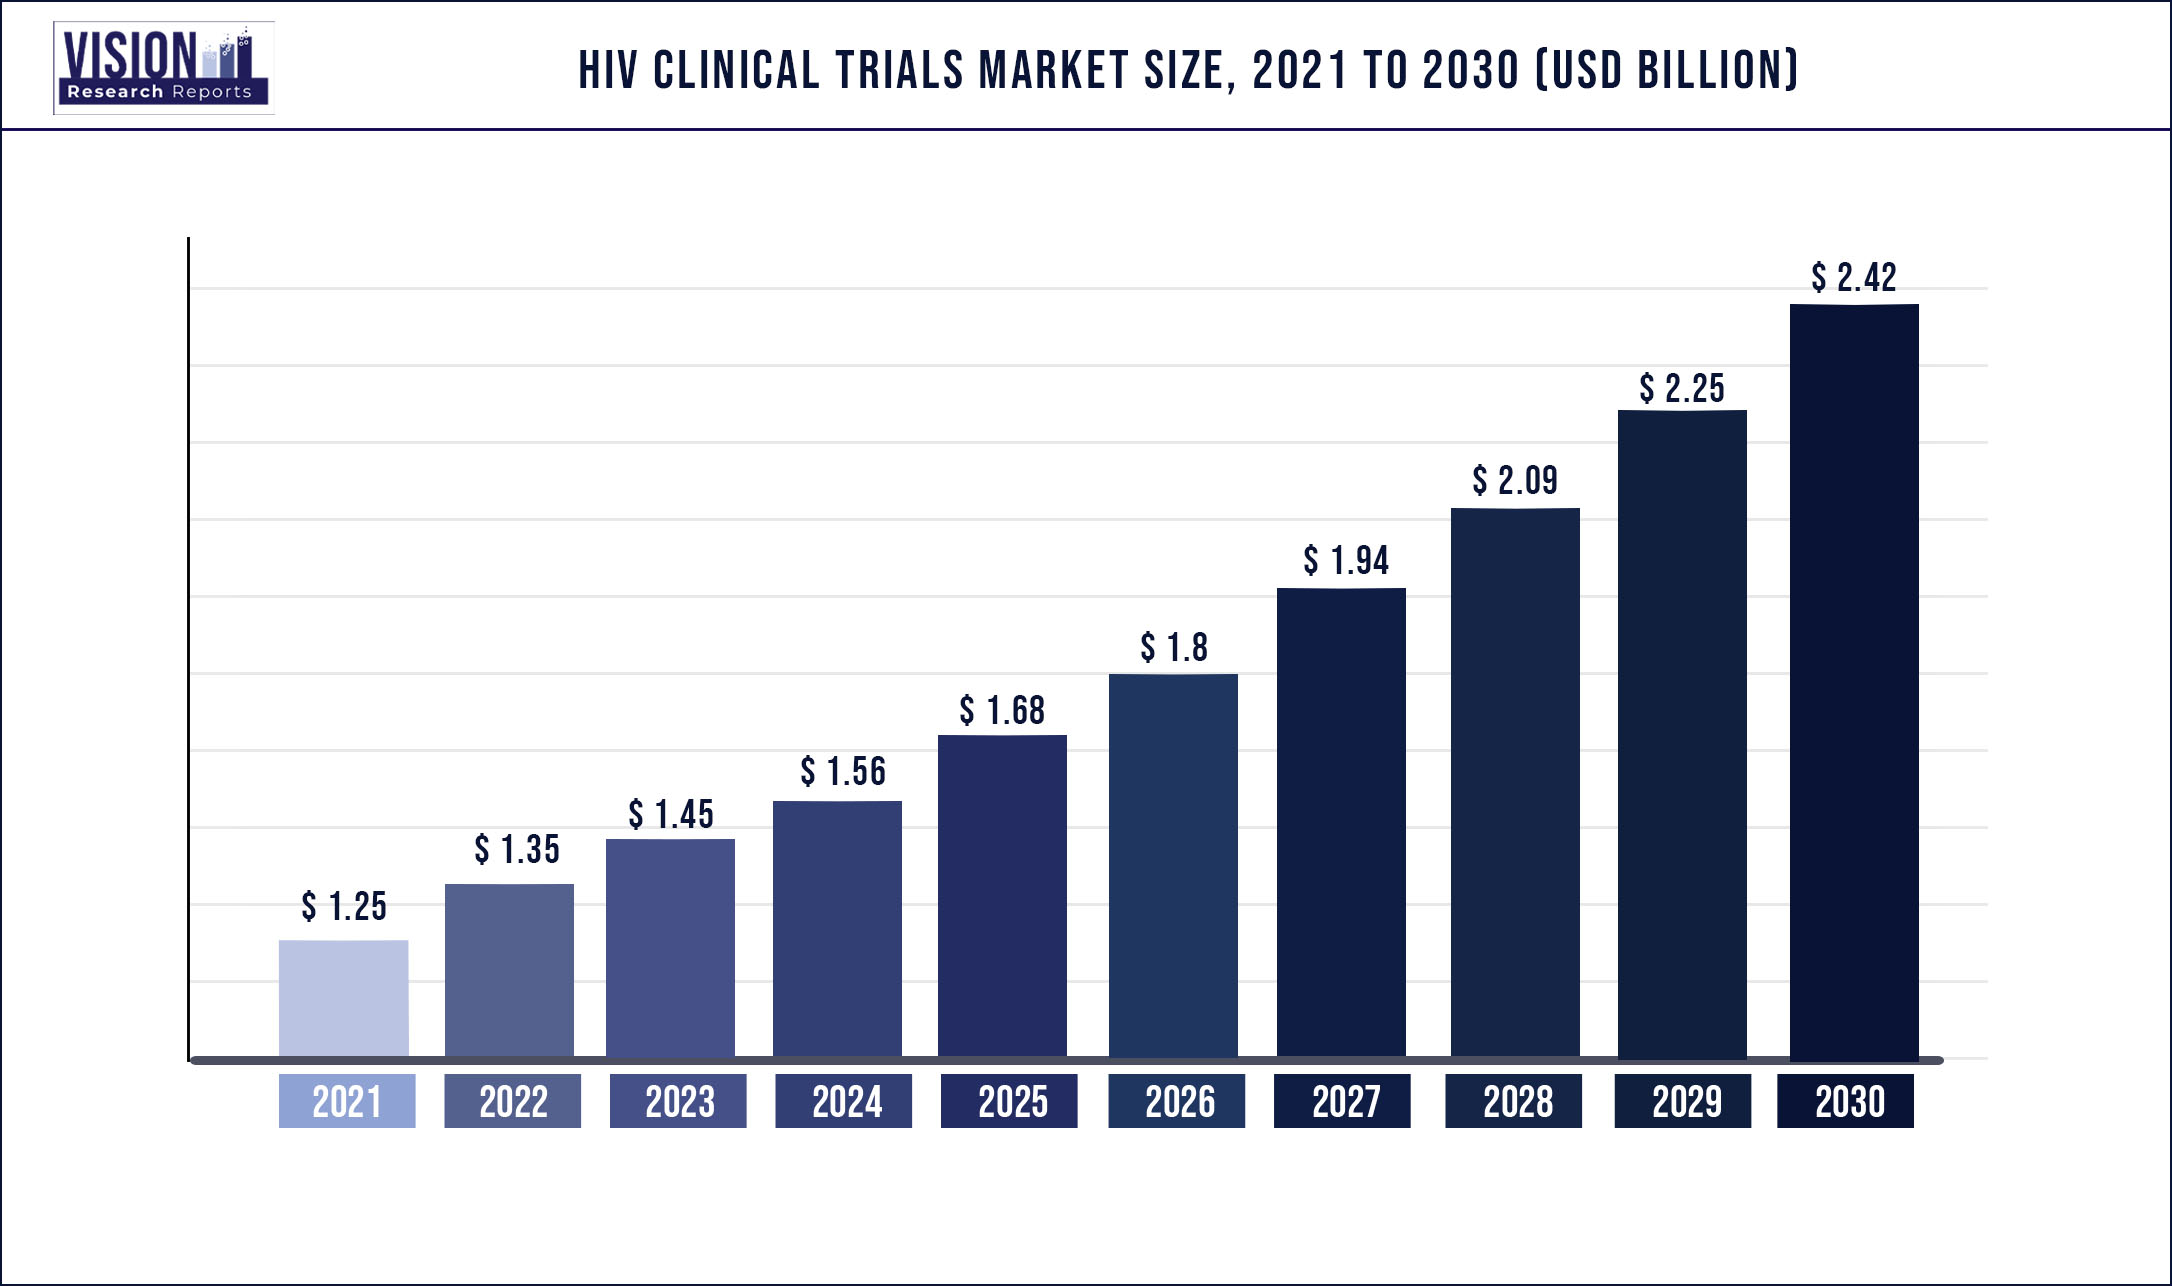 HIV Clinical Trials Market Size 2021 to 2030